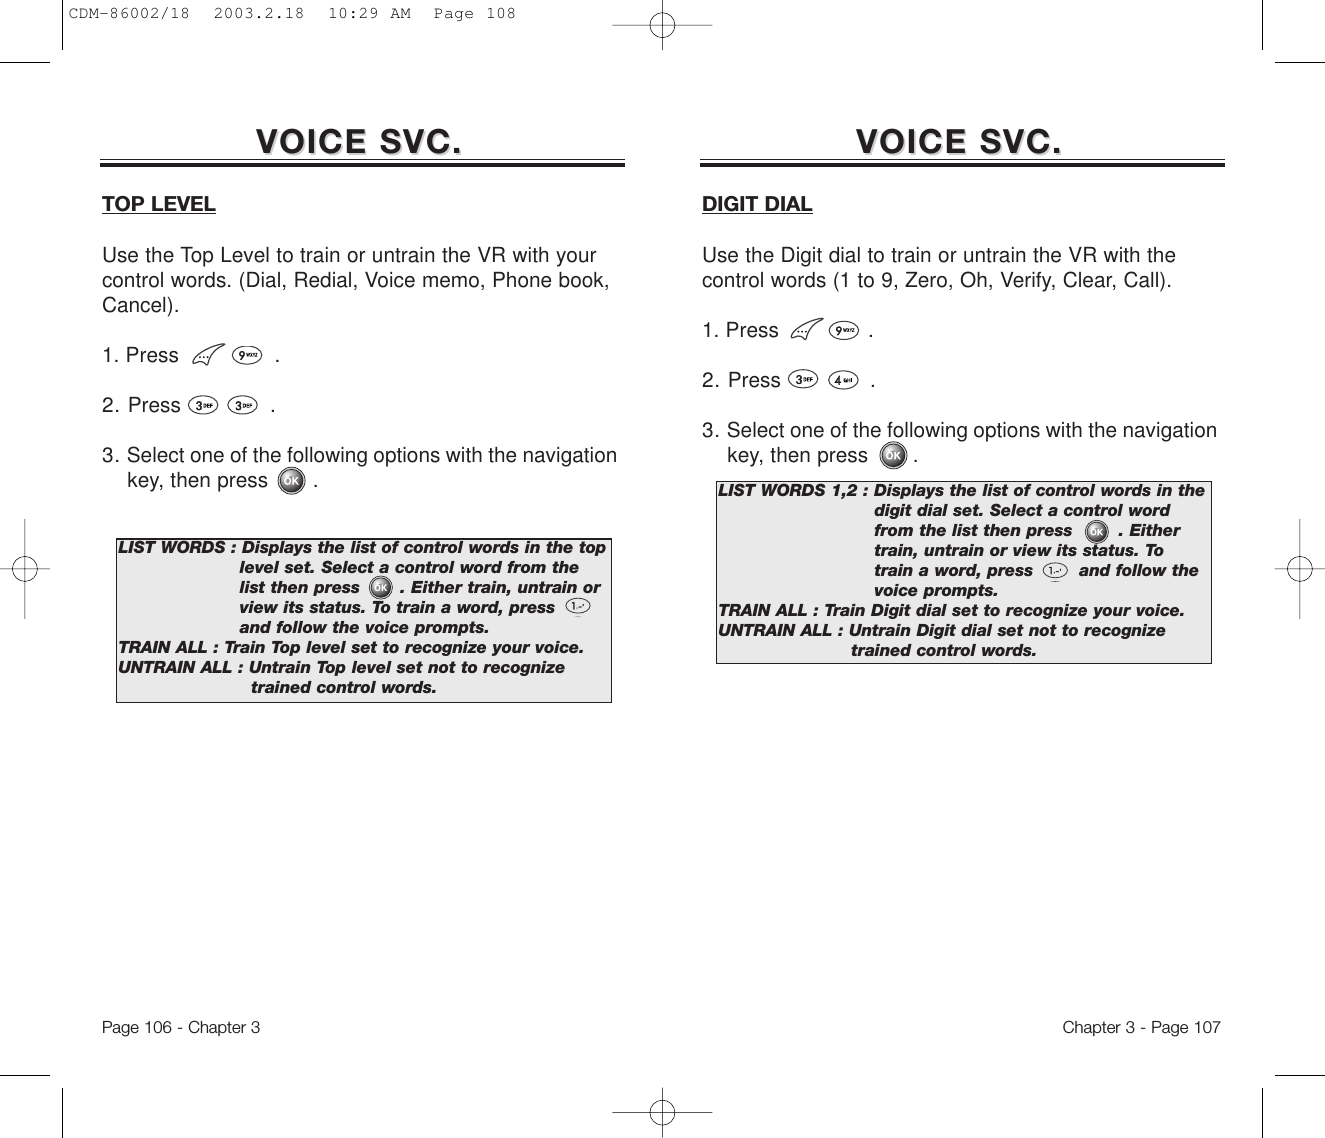 Chapter 3 - Page 107Page 106 - Chapter 3VOICE SVC.VOICE SVC. VOICE SVC.VOICE SVC.TOP LEVELUse the Top Level to train or untrain the VR with yourcontrol words. (Dial, Redial, Voice memo, Phone book,Cancel).1. Press               .2. Press              .3. Select one of the following options with the navigation key, then press       .LIST WORDS : Displays the list of control words in the top level set. Select a control word from the  list then press       . Either train, untrain or view its status. To train a word, press        and follow the voice prompts.TRAIN ALL : Train Top level set to recognize your voice.UNTRAIN ALL : Untrain Top level set not to recognize trained control words.DIGIT DIALUse the Digit dial to train or untrain the VR with thecontrol words (1 to 9, Zero, Oh, Verify, Clear, Call).1. Press              .2. Press              .3. Select one of the following options with the navigation key, then press       .LIST WORDS 1,2 : Displays the list of control words in the digit dial set. Select a control word from the list then press        . Either train, untrain or view its status. To  train a word, press        and follow the voice prompts.TRAIN ALL : Train Digit dial set to recognize your voice.UNTRAIN ALL : Untrain Digit dial set not to recognize  trained control words.CDM-86002/18  2003.2.18  10:29 AM  Page 108